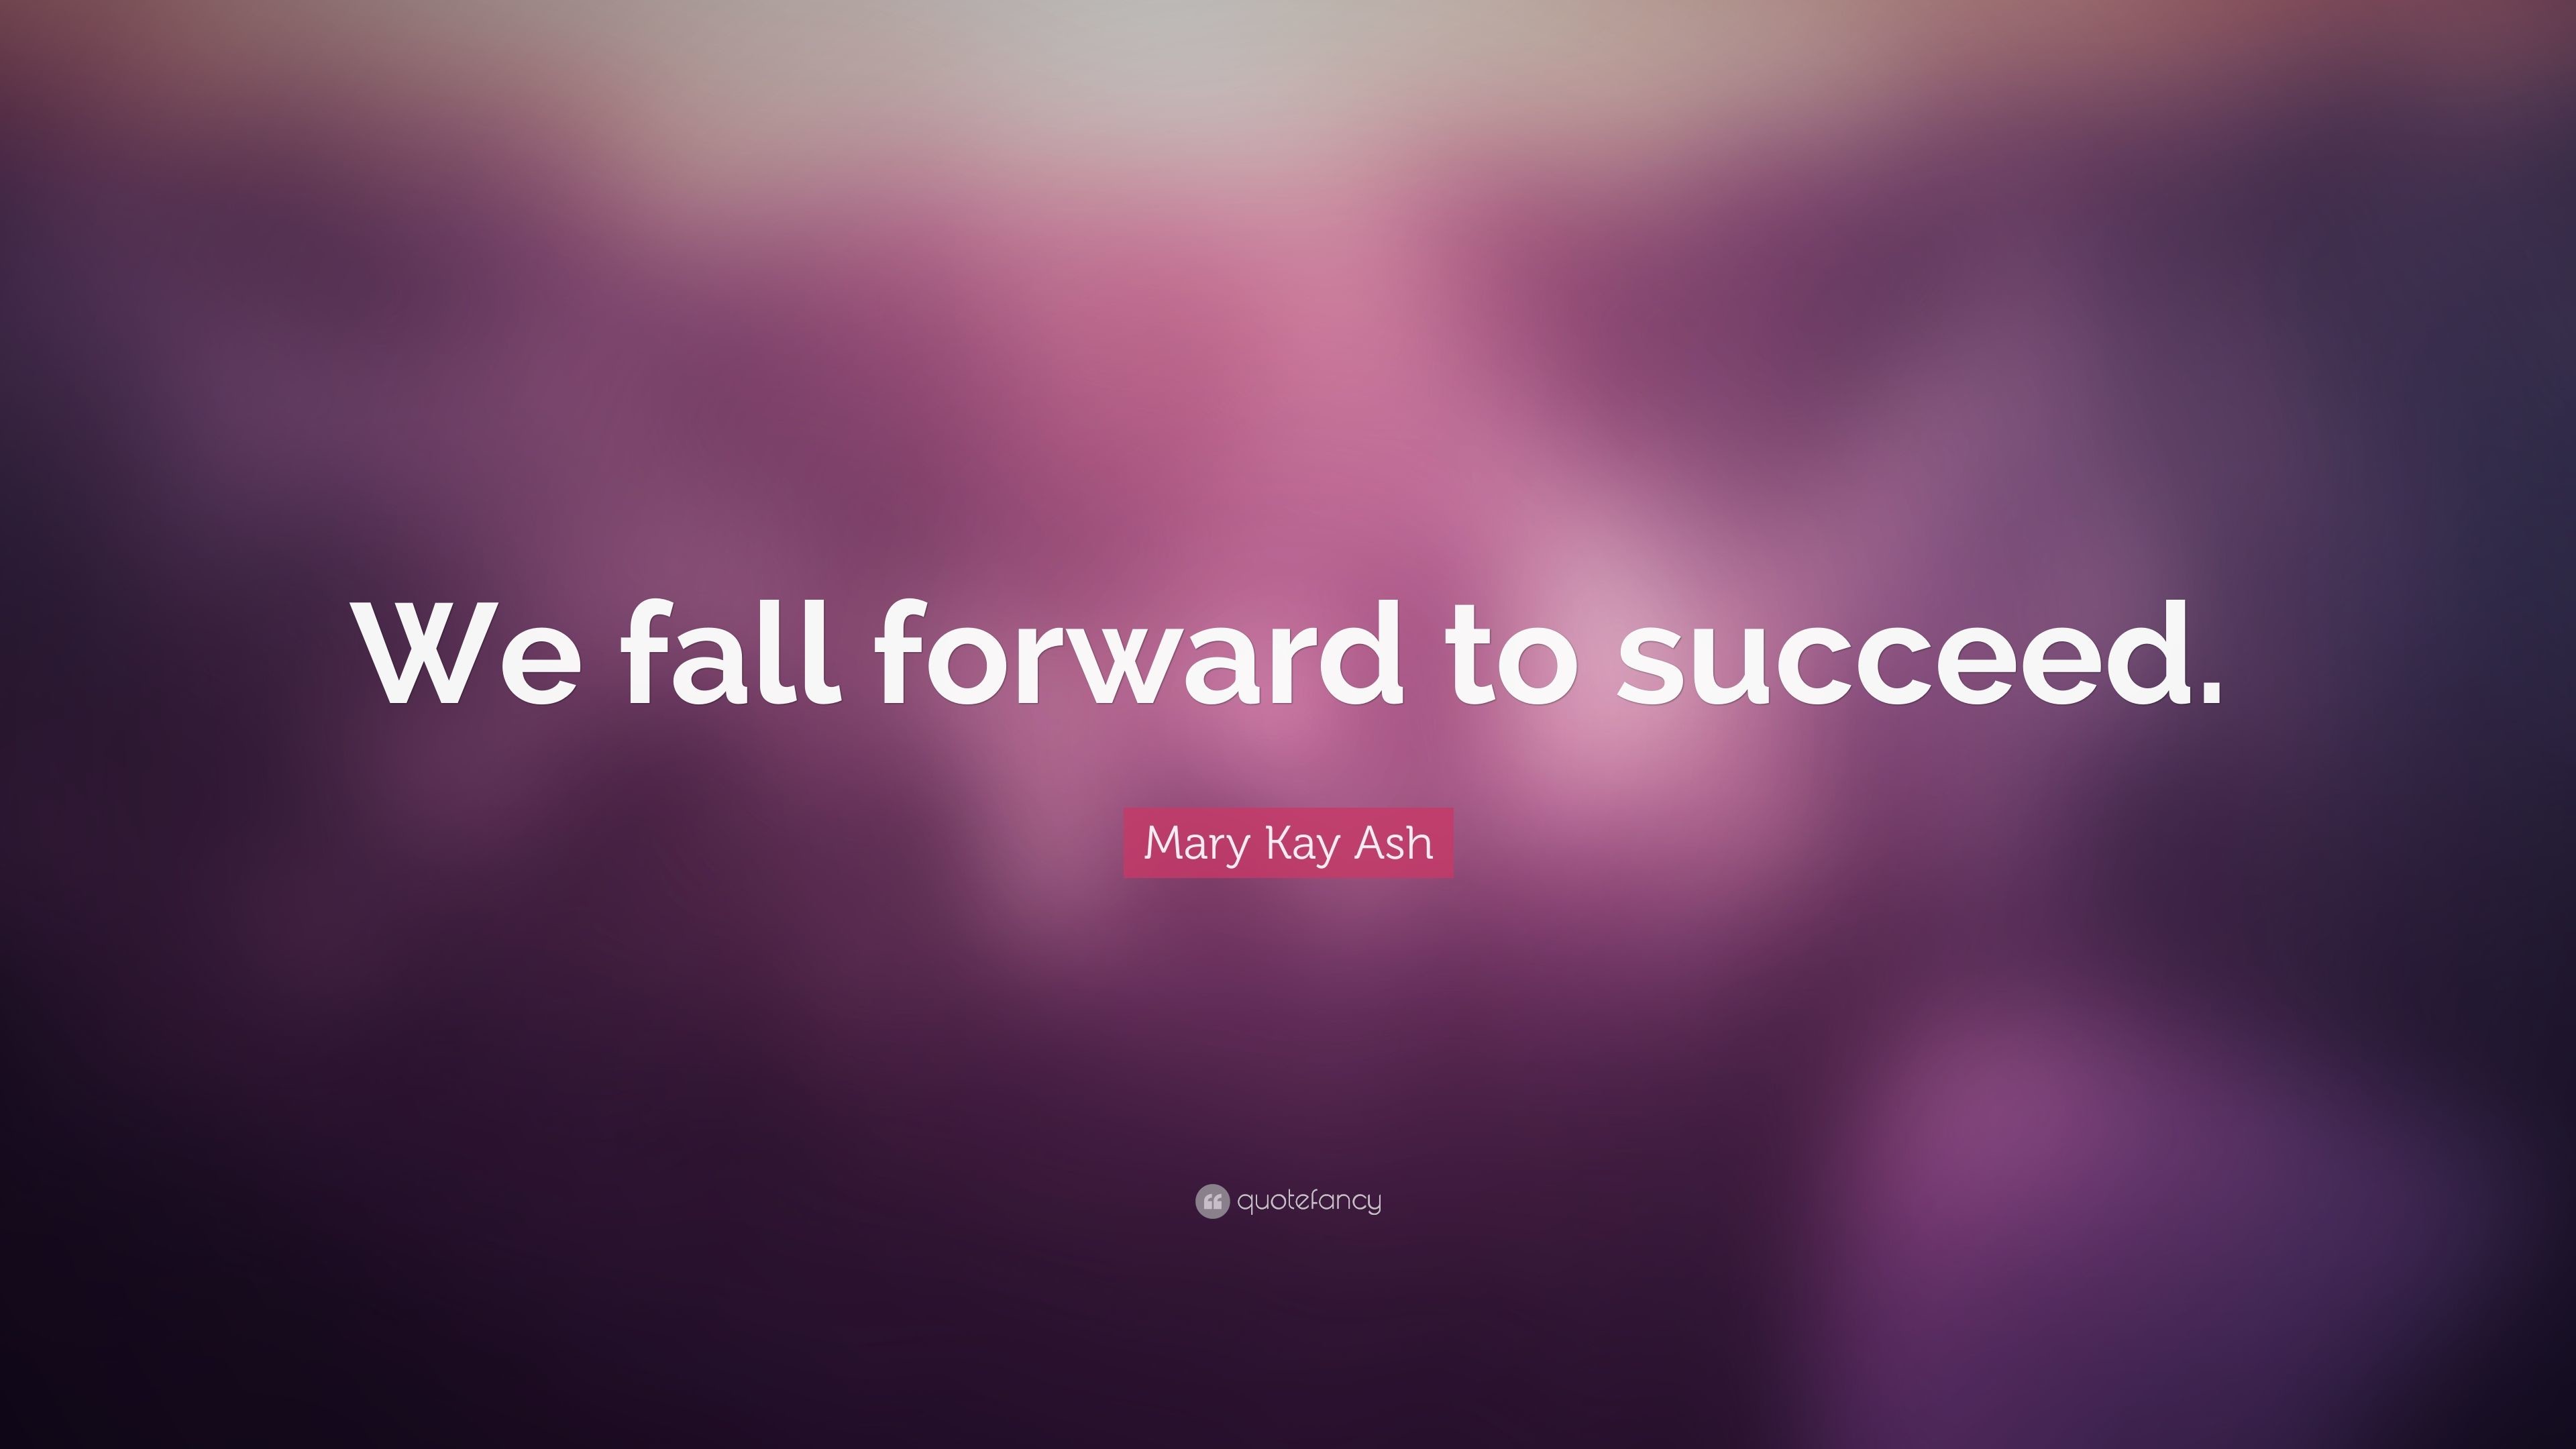 3840x2160 Mary Kay Ash Quote: “We fall forward to succeed.”